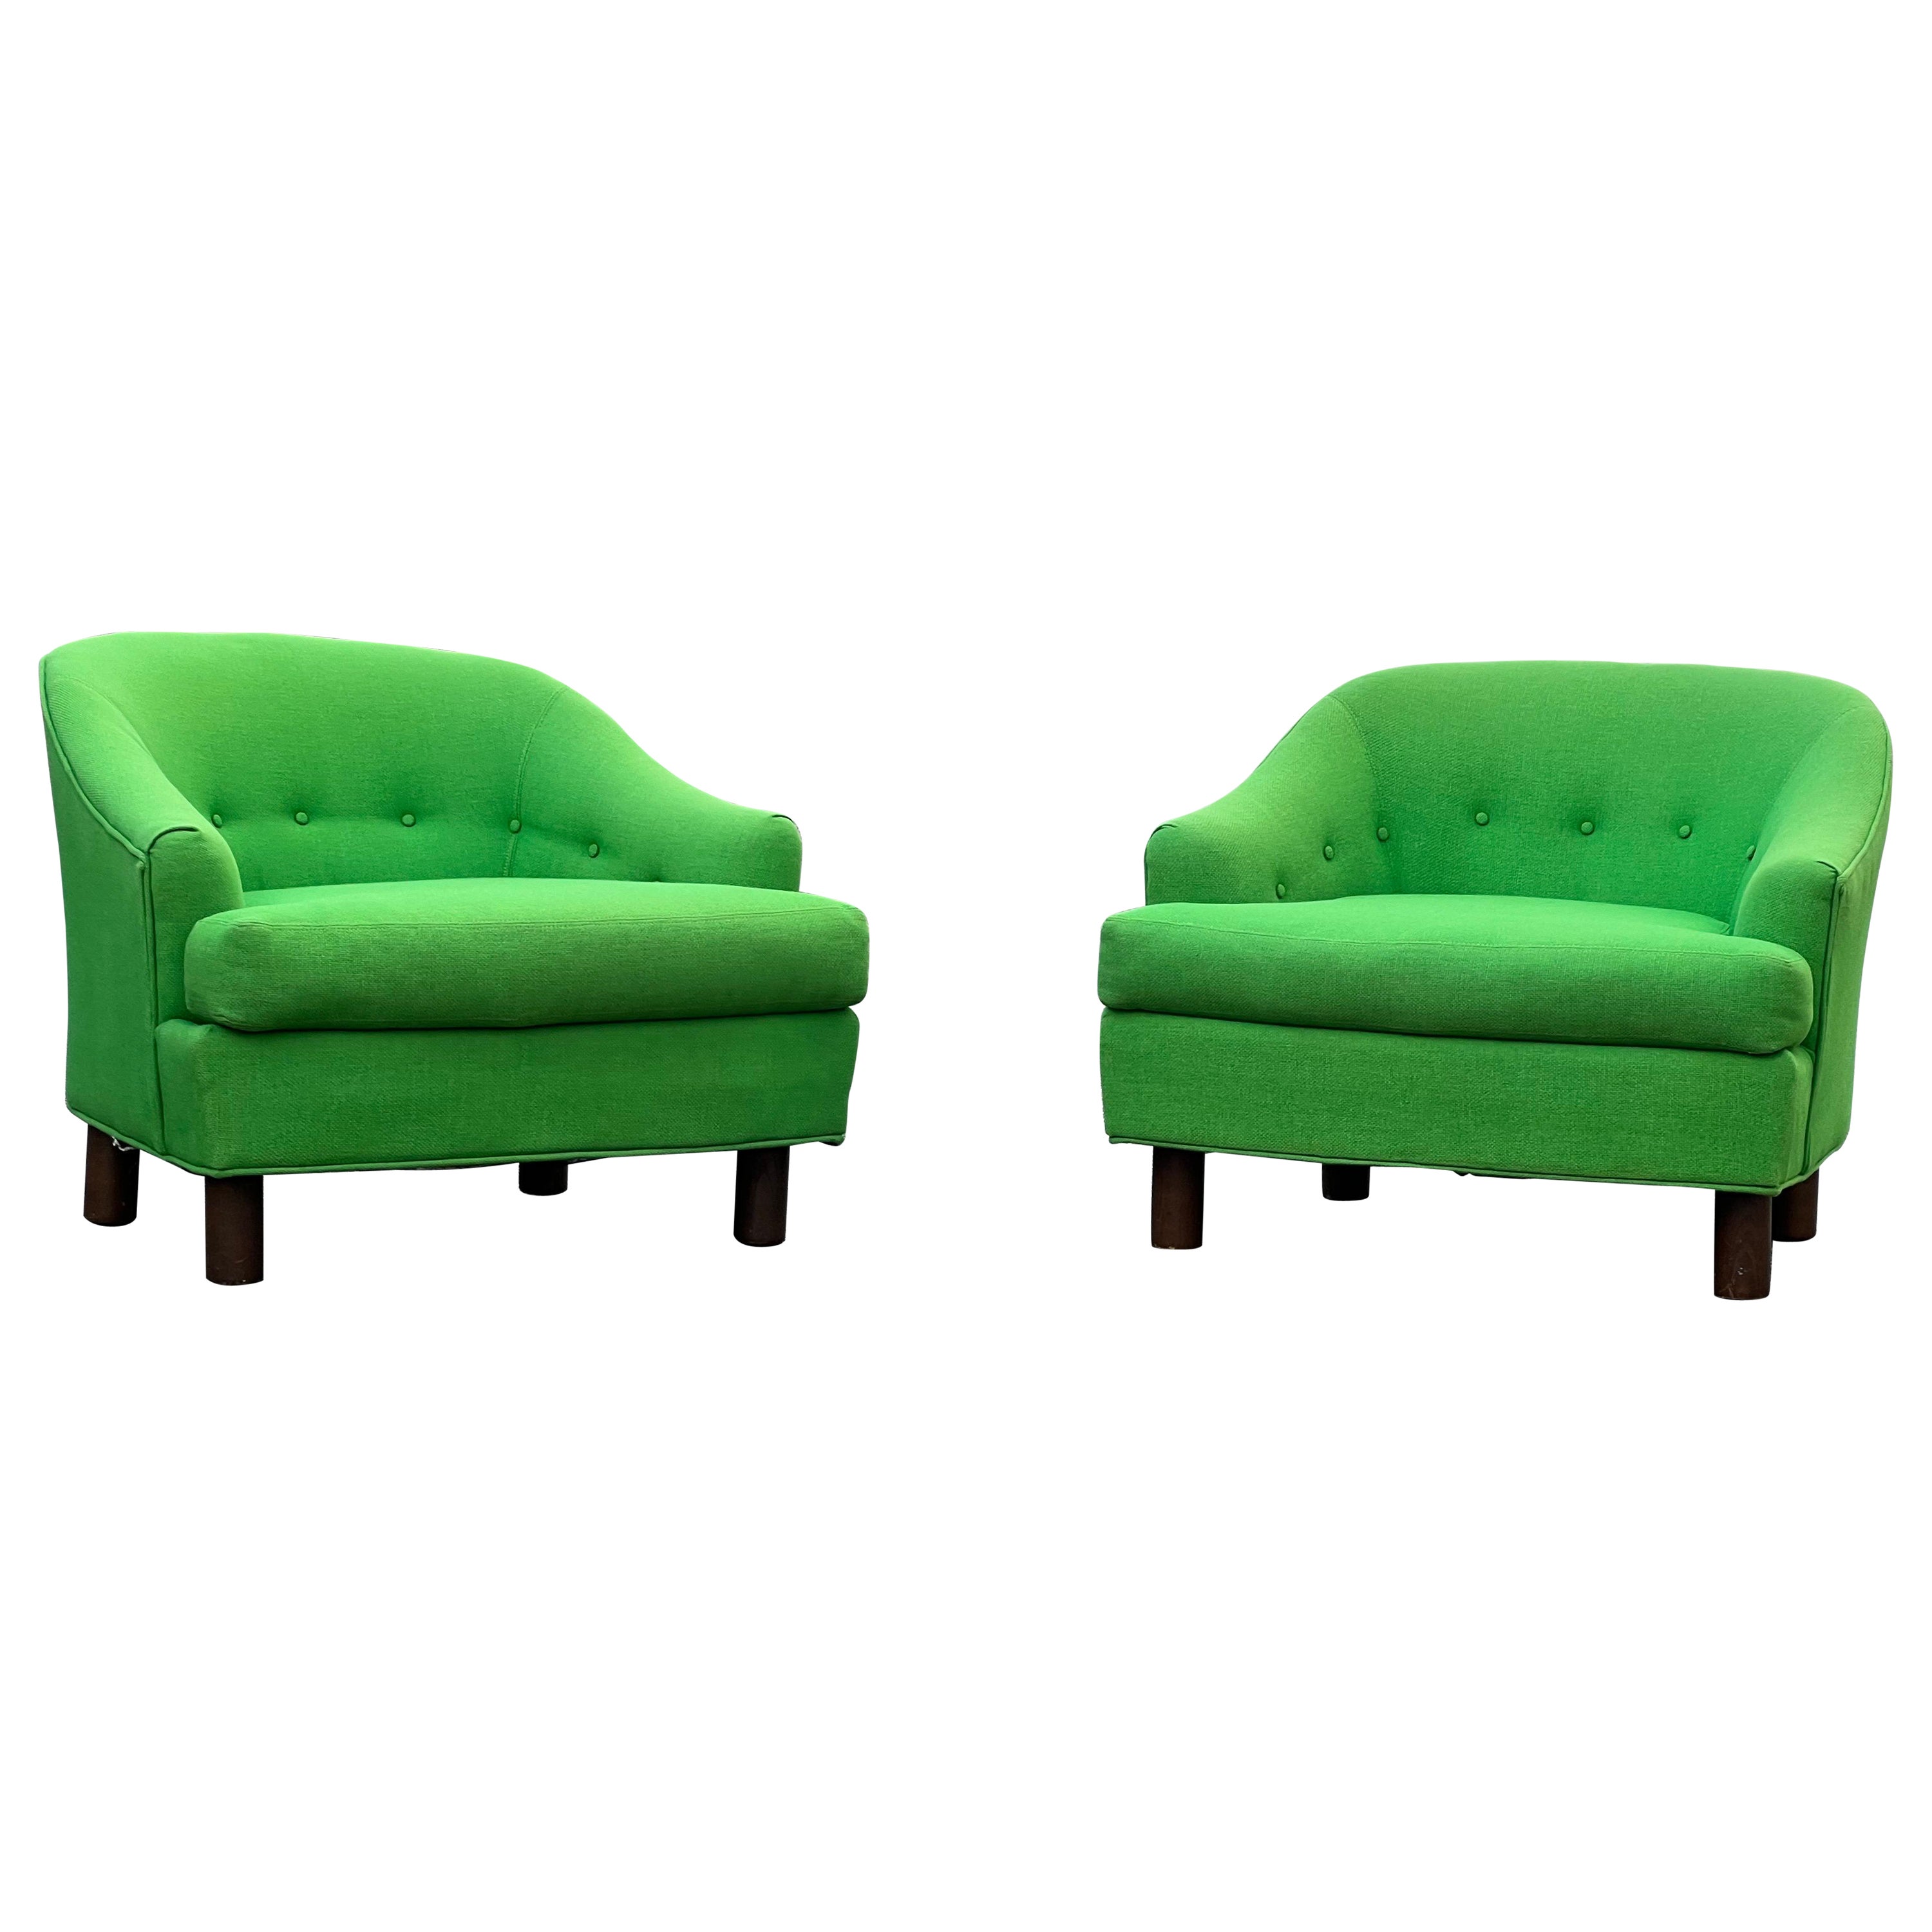 A pair of green mid-Century modern Monroe of selig barrel back chairs 